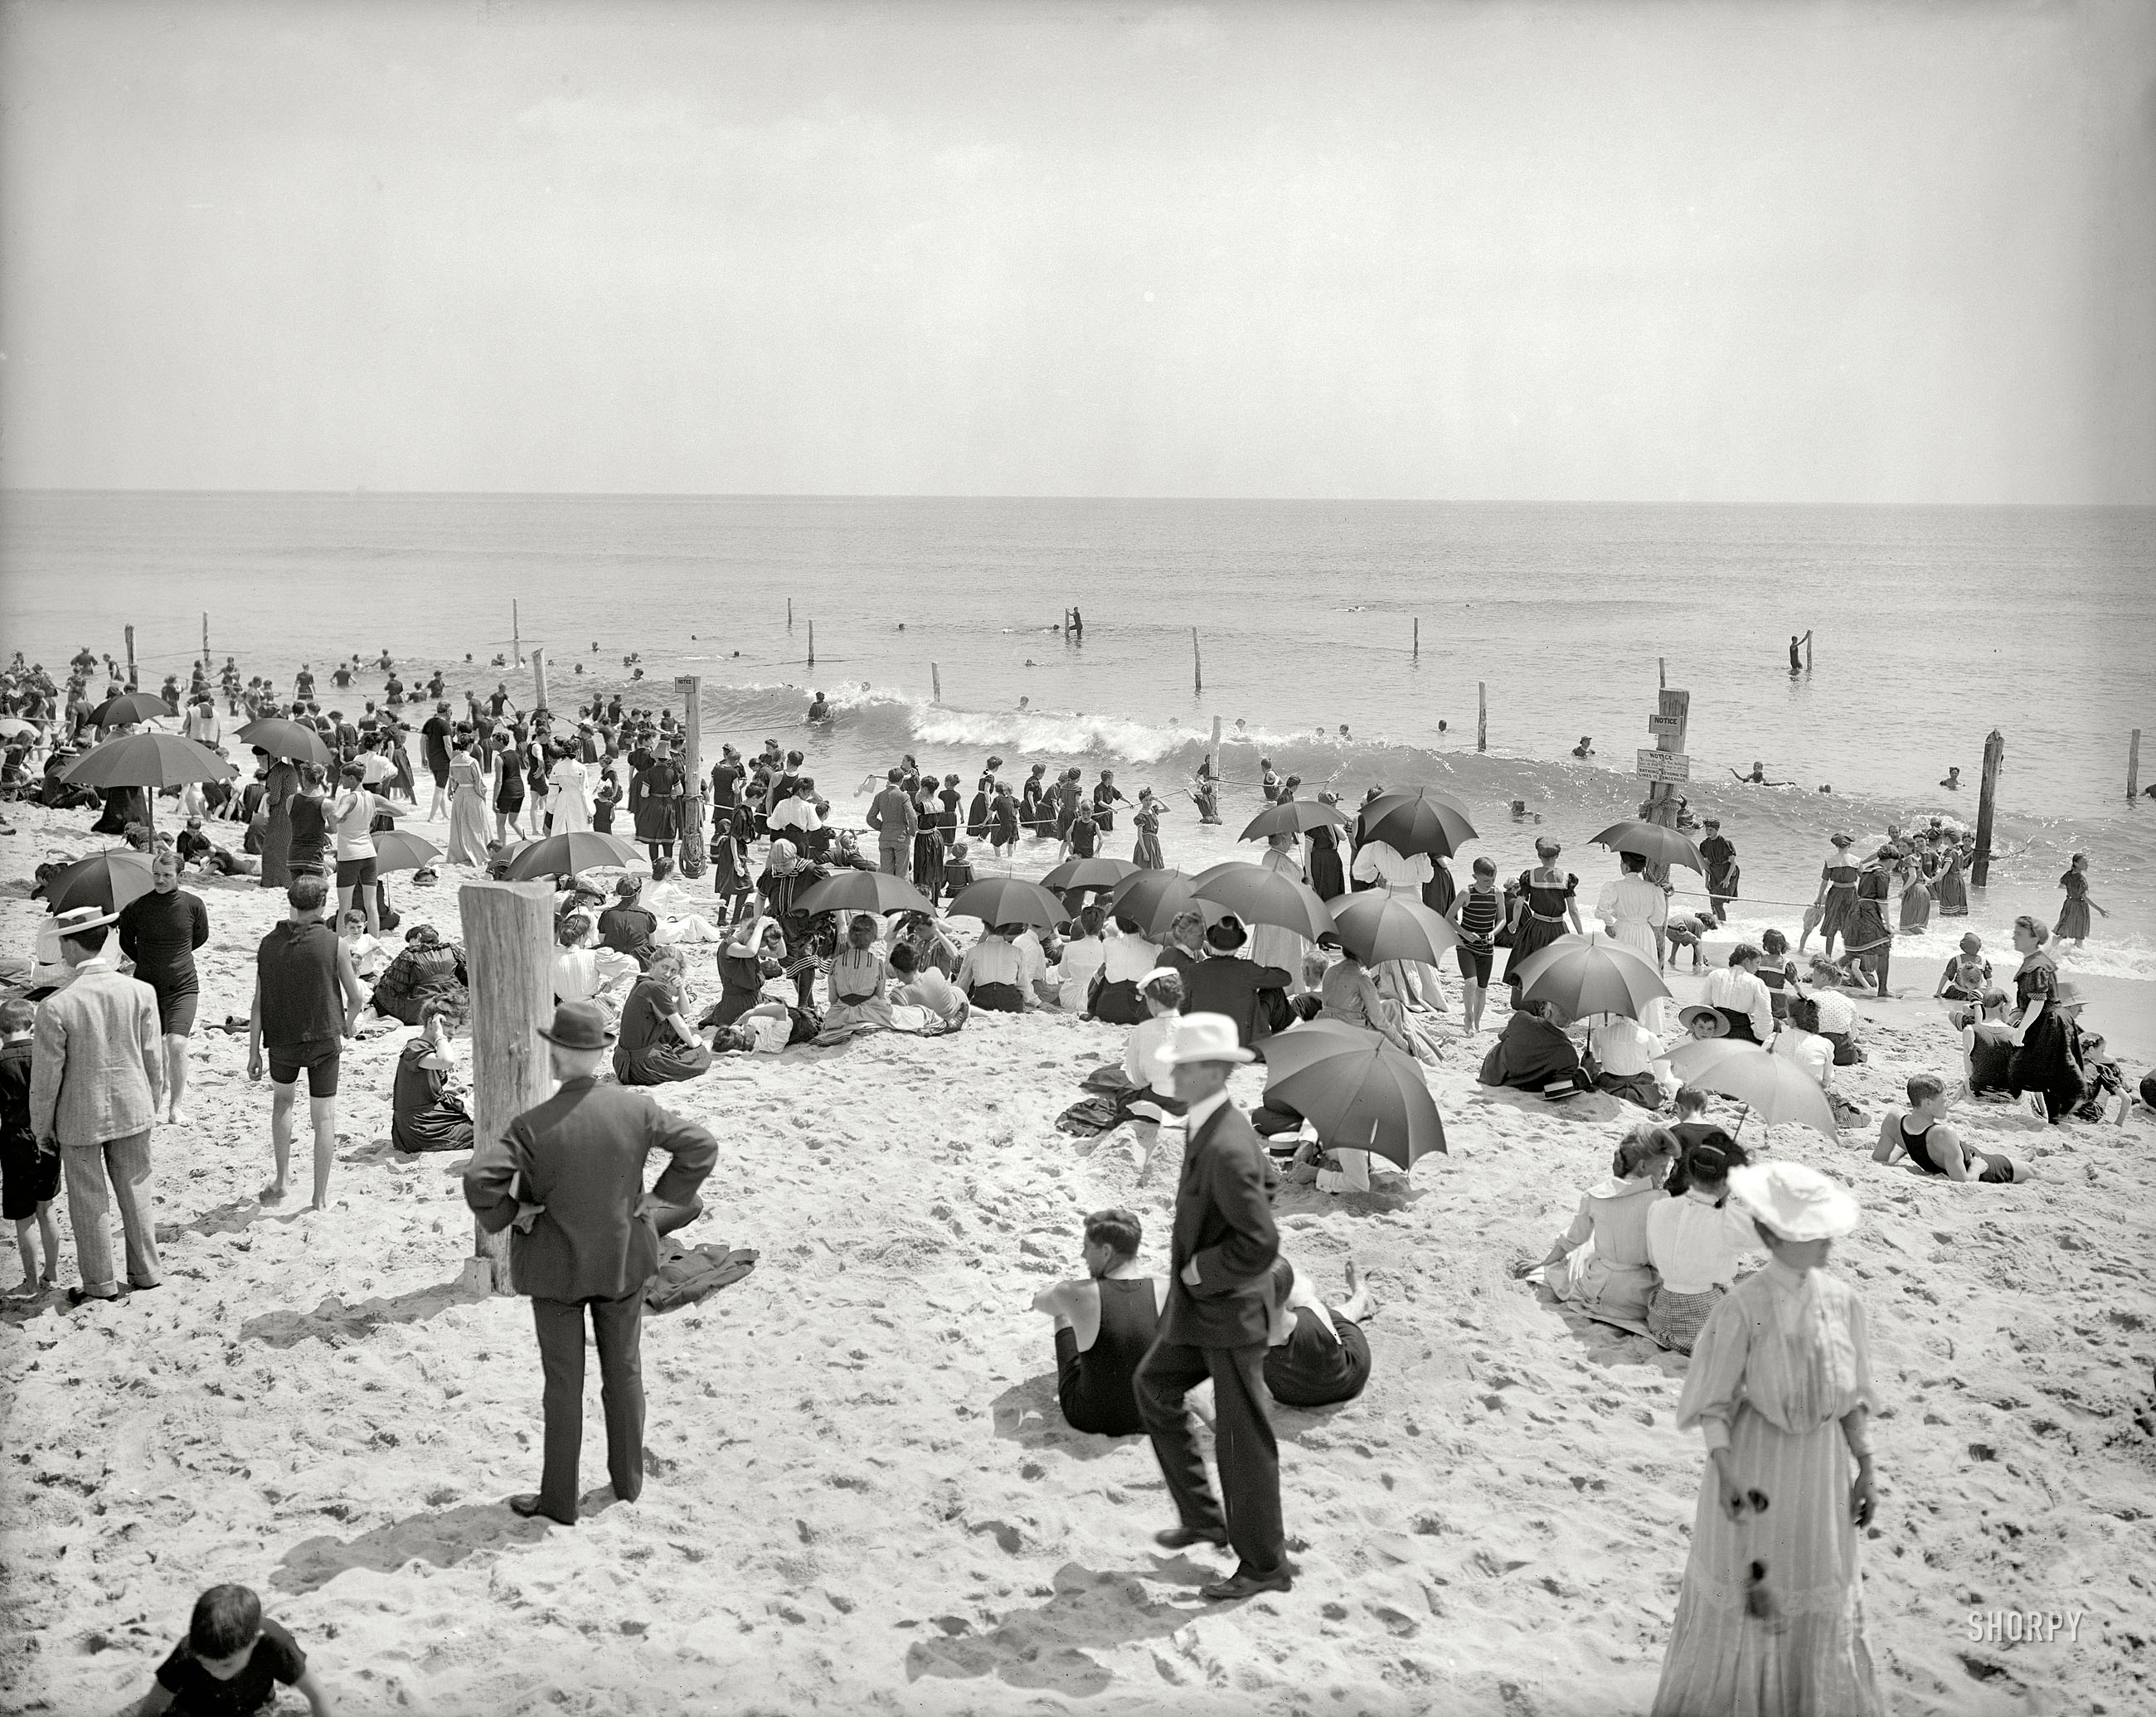 The Jersey Shore circa 1905. "On the beach, Asbury Park." 8x10 inch dry plate glass negative, Detroit Publishing Company. View full size.